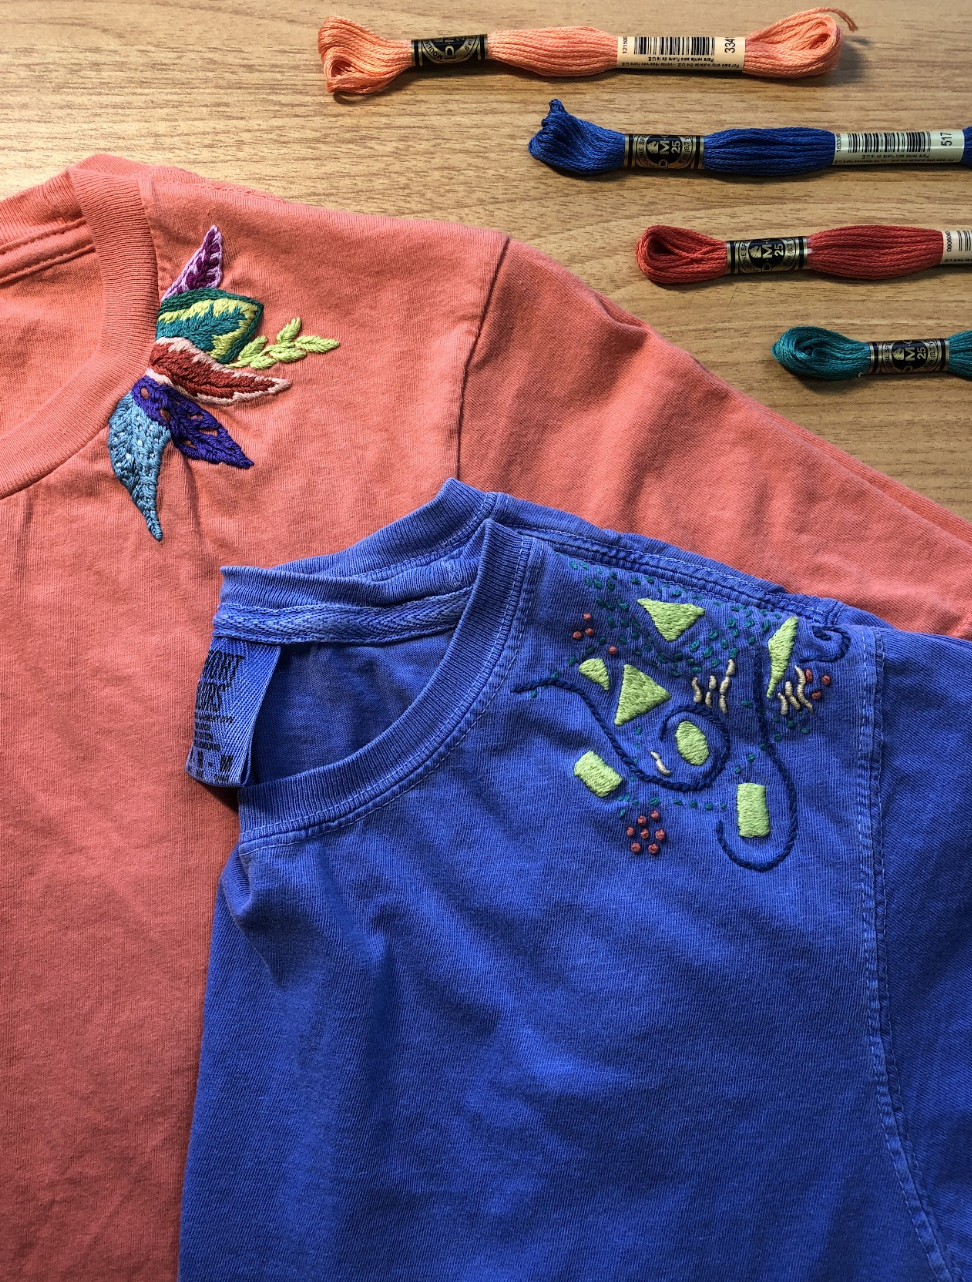 EMBROIDERY CLASS: Upcycle Your Clothing with Hand Embroidery